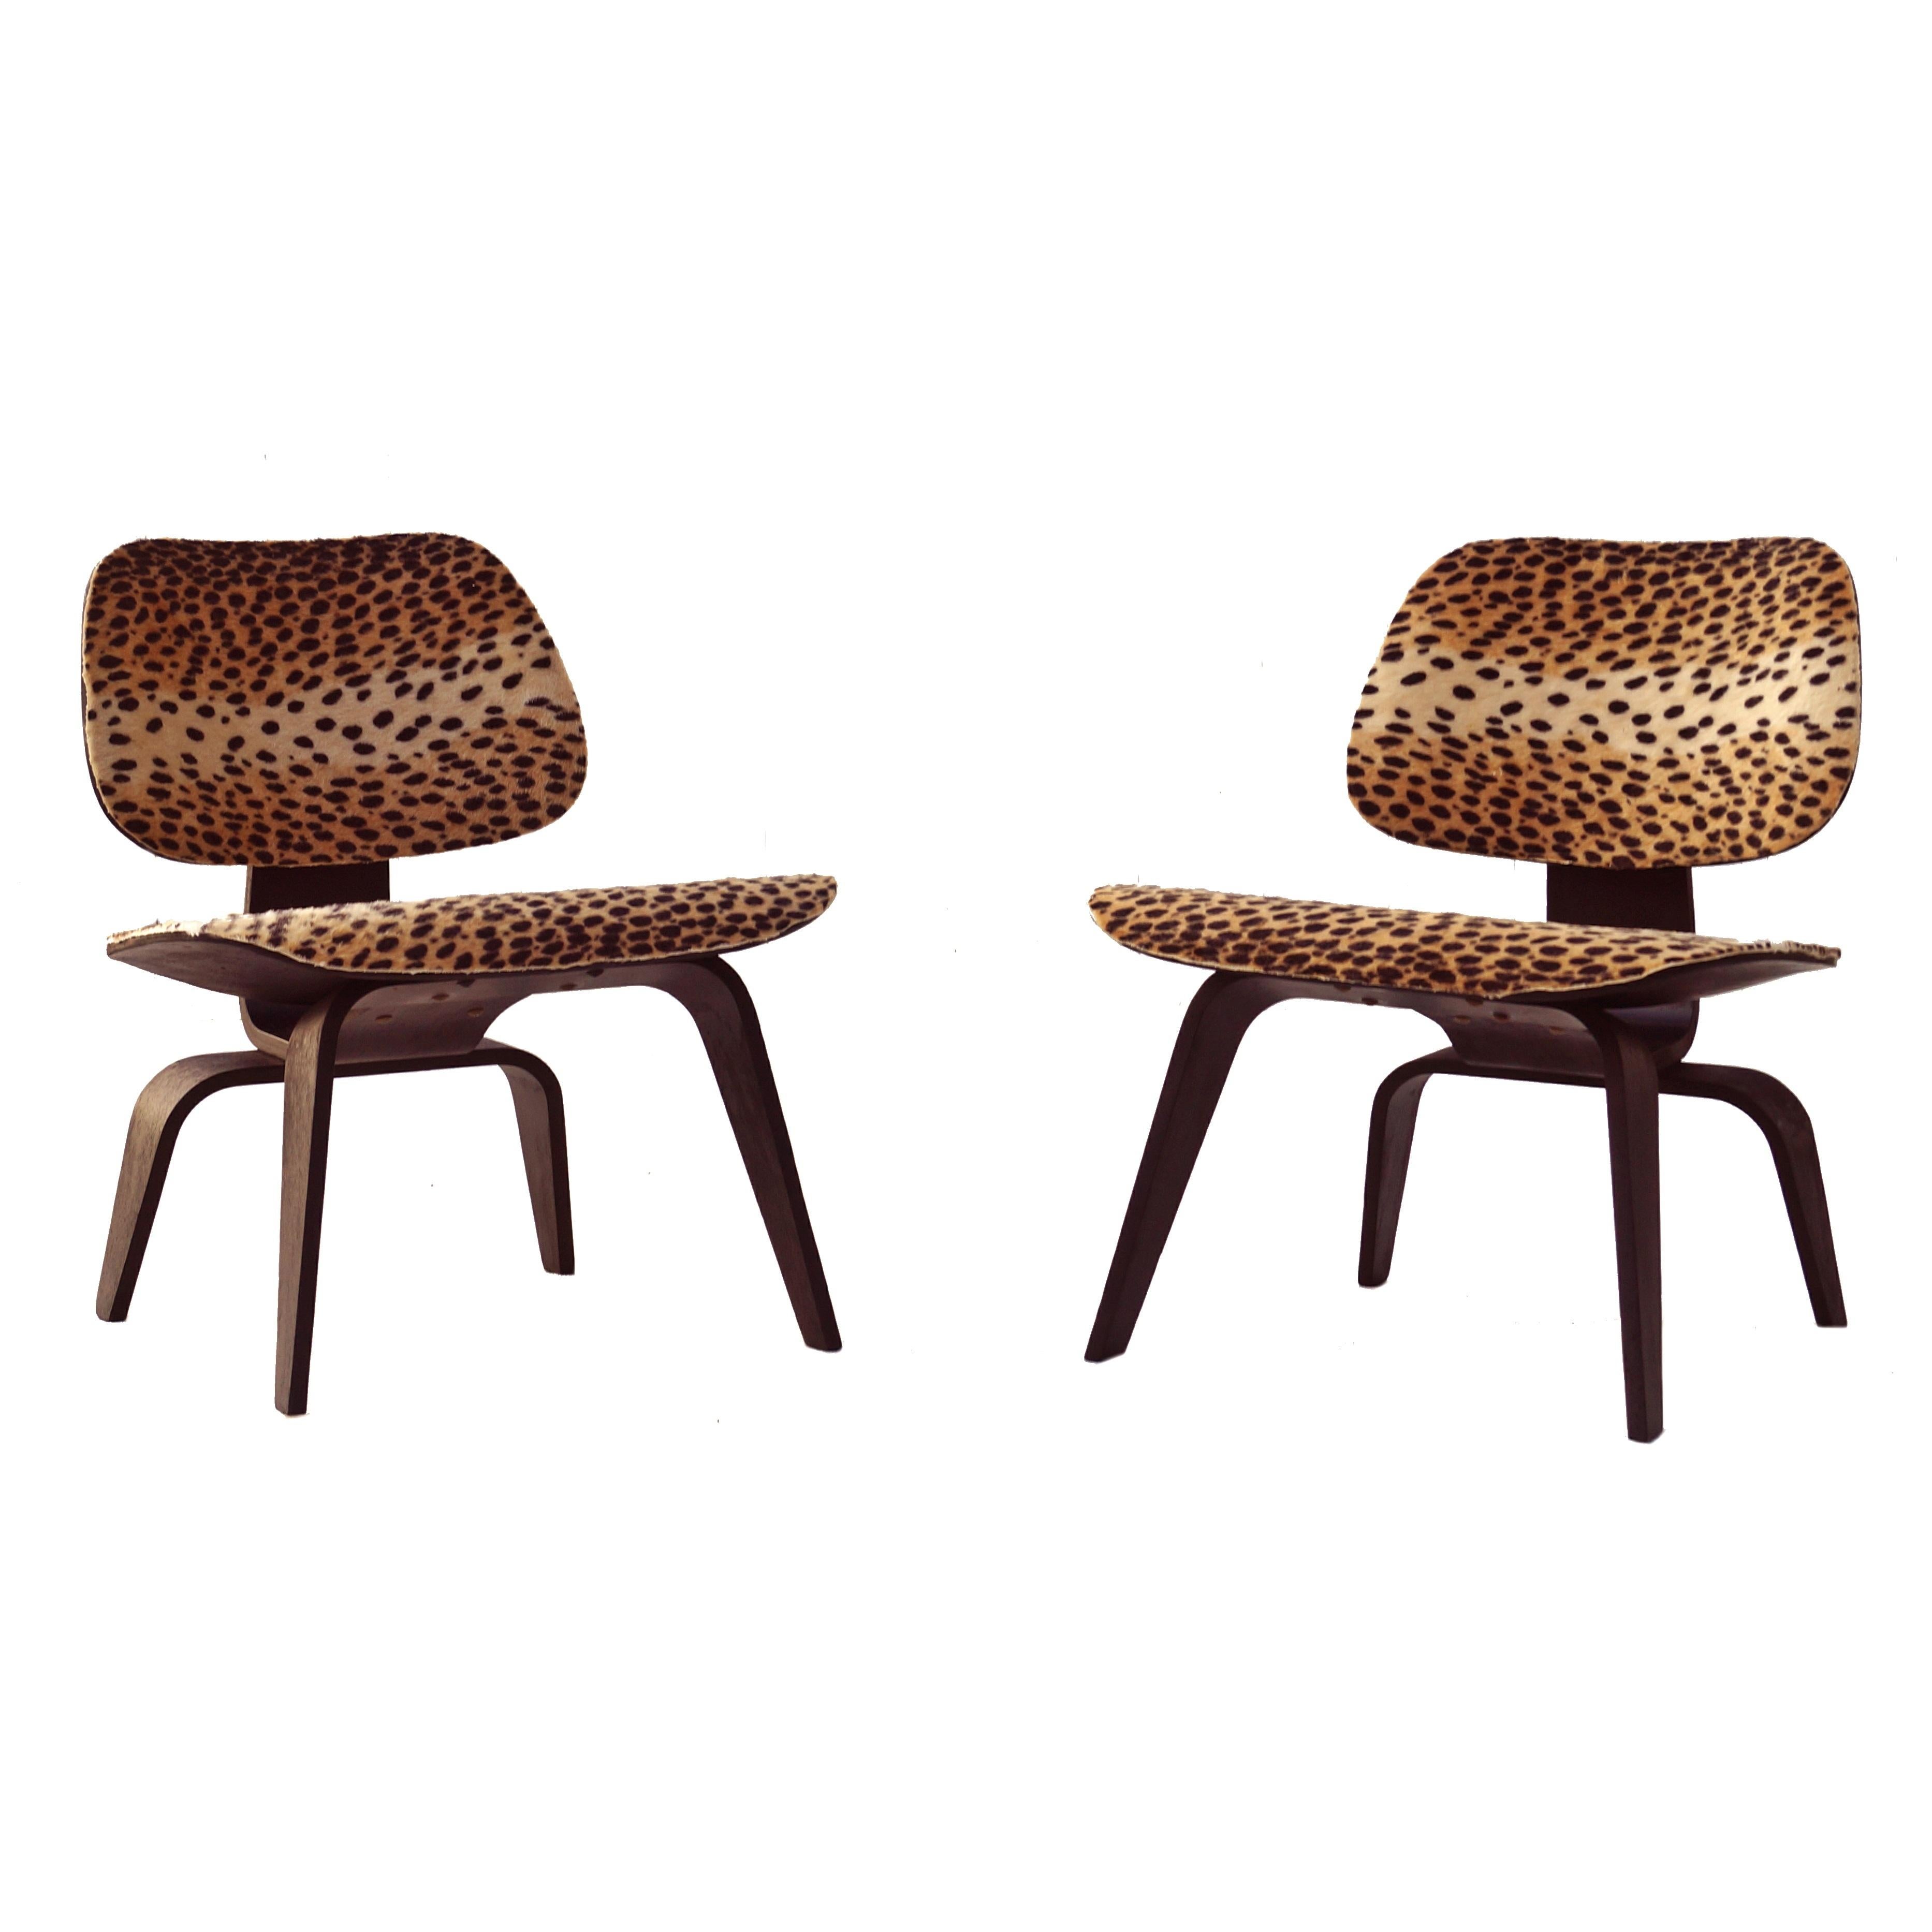 Pair of Charles Eames for Herman Miller LCW lounge chairs.